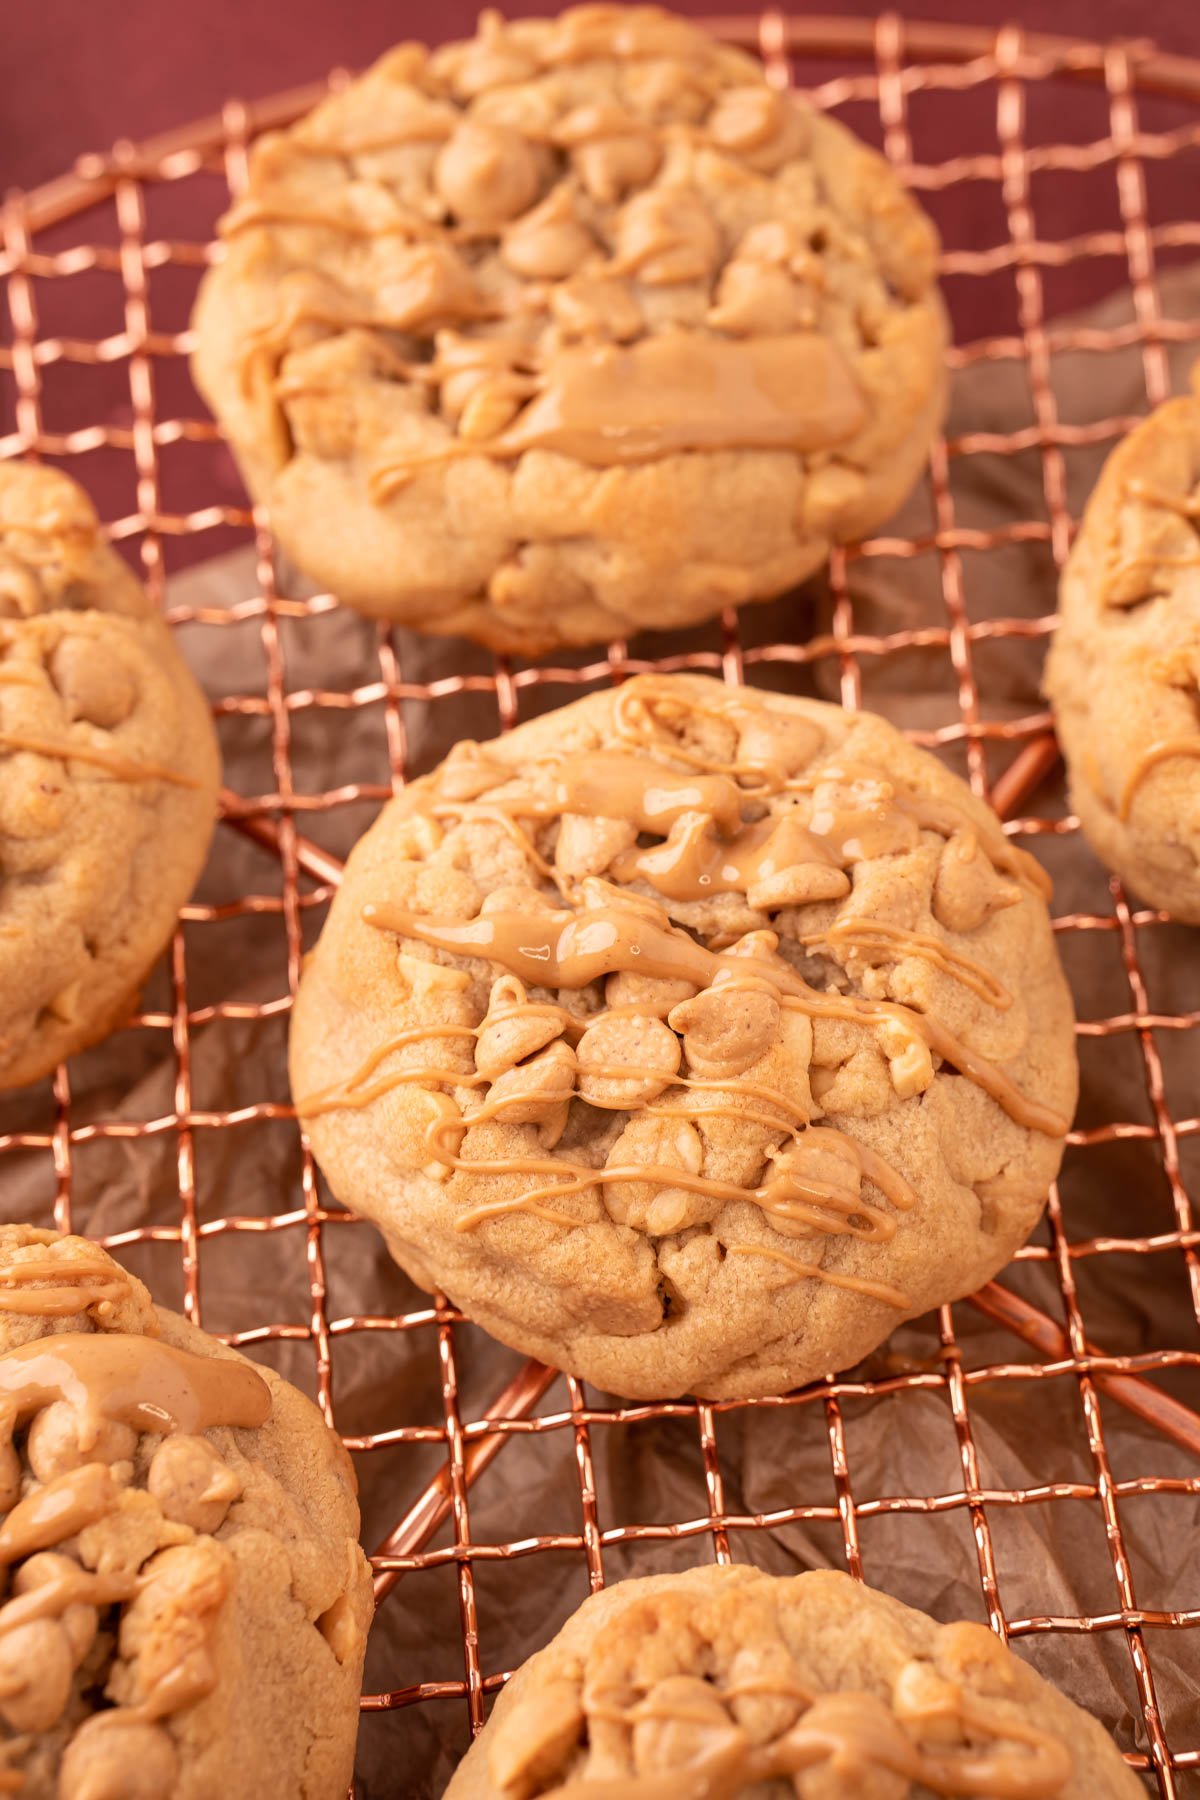 Peanut Butter Cookies made with nuts and peanut butter chips on a copper wire rack.